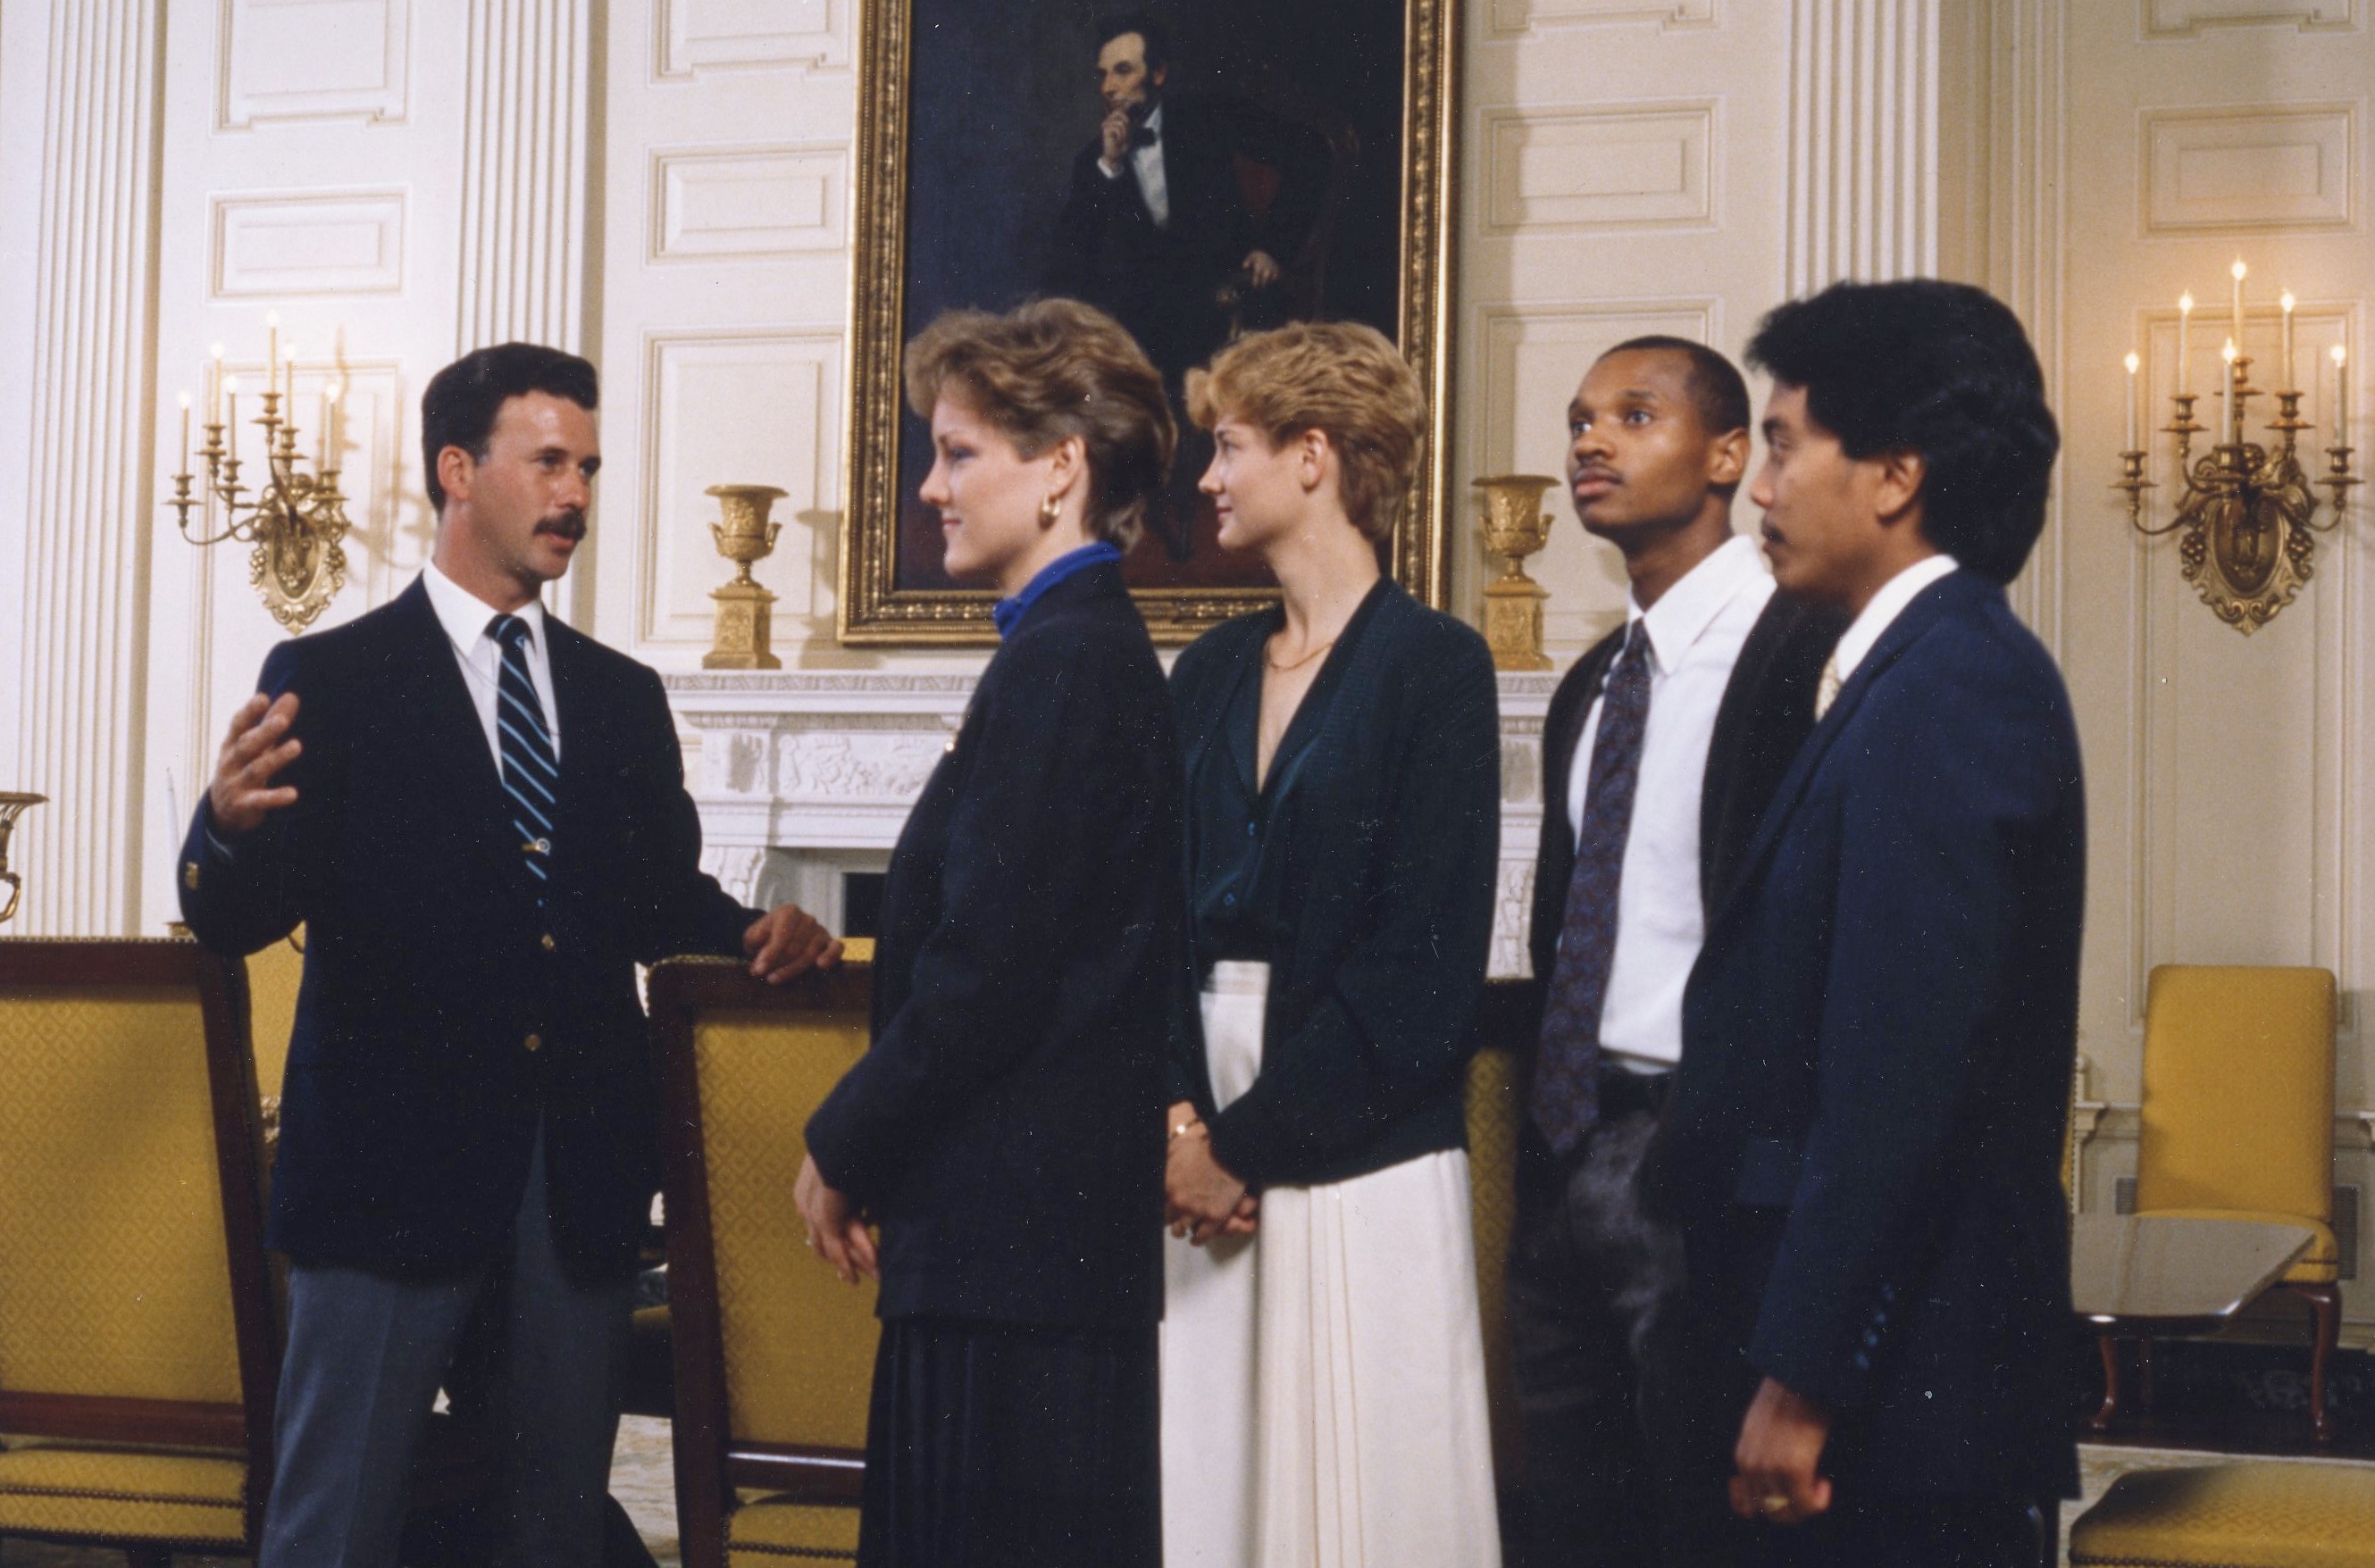 White House tours in the 1990s